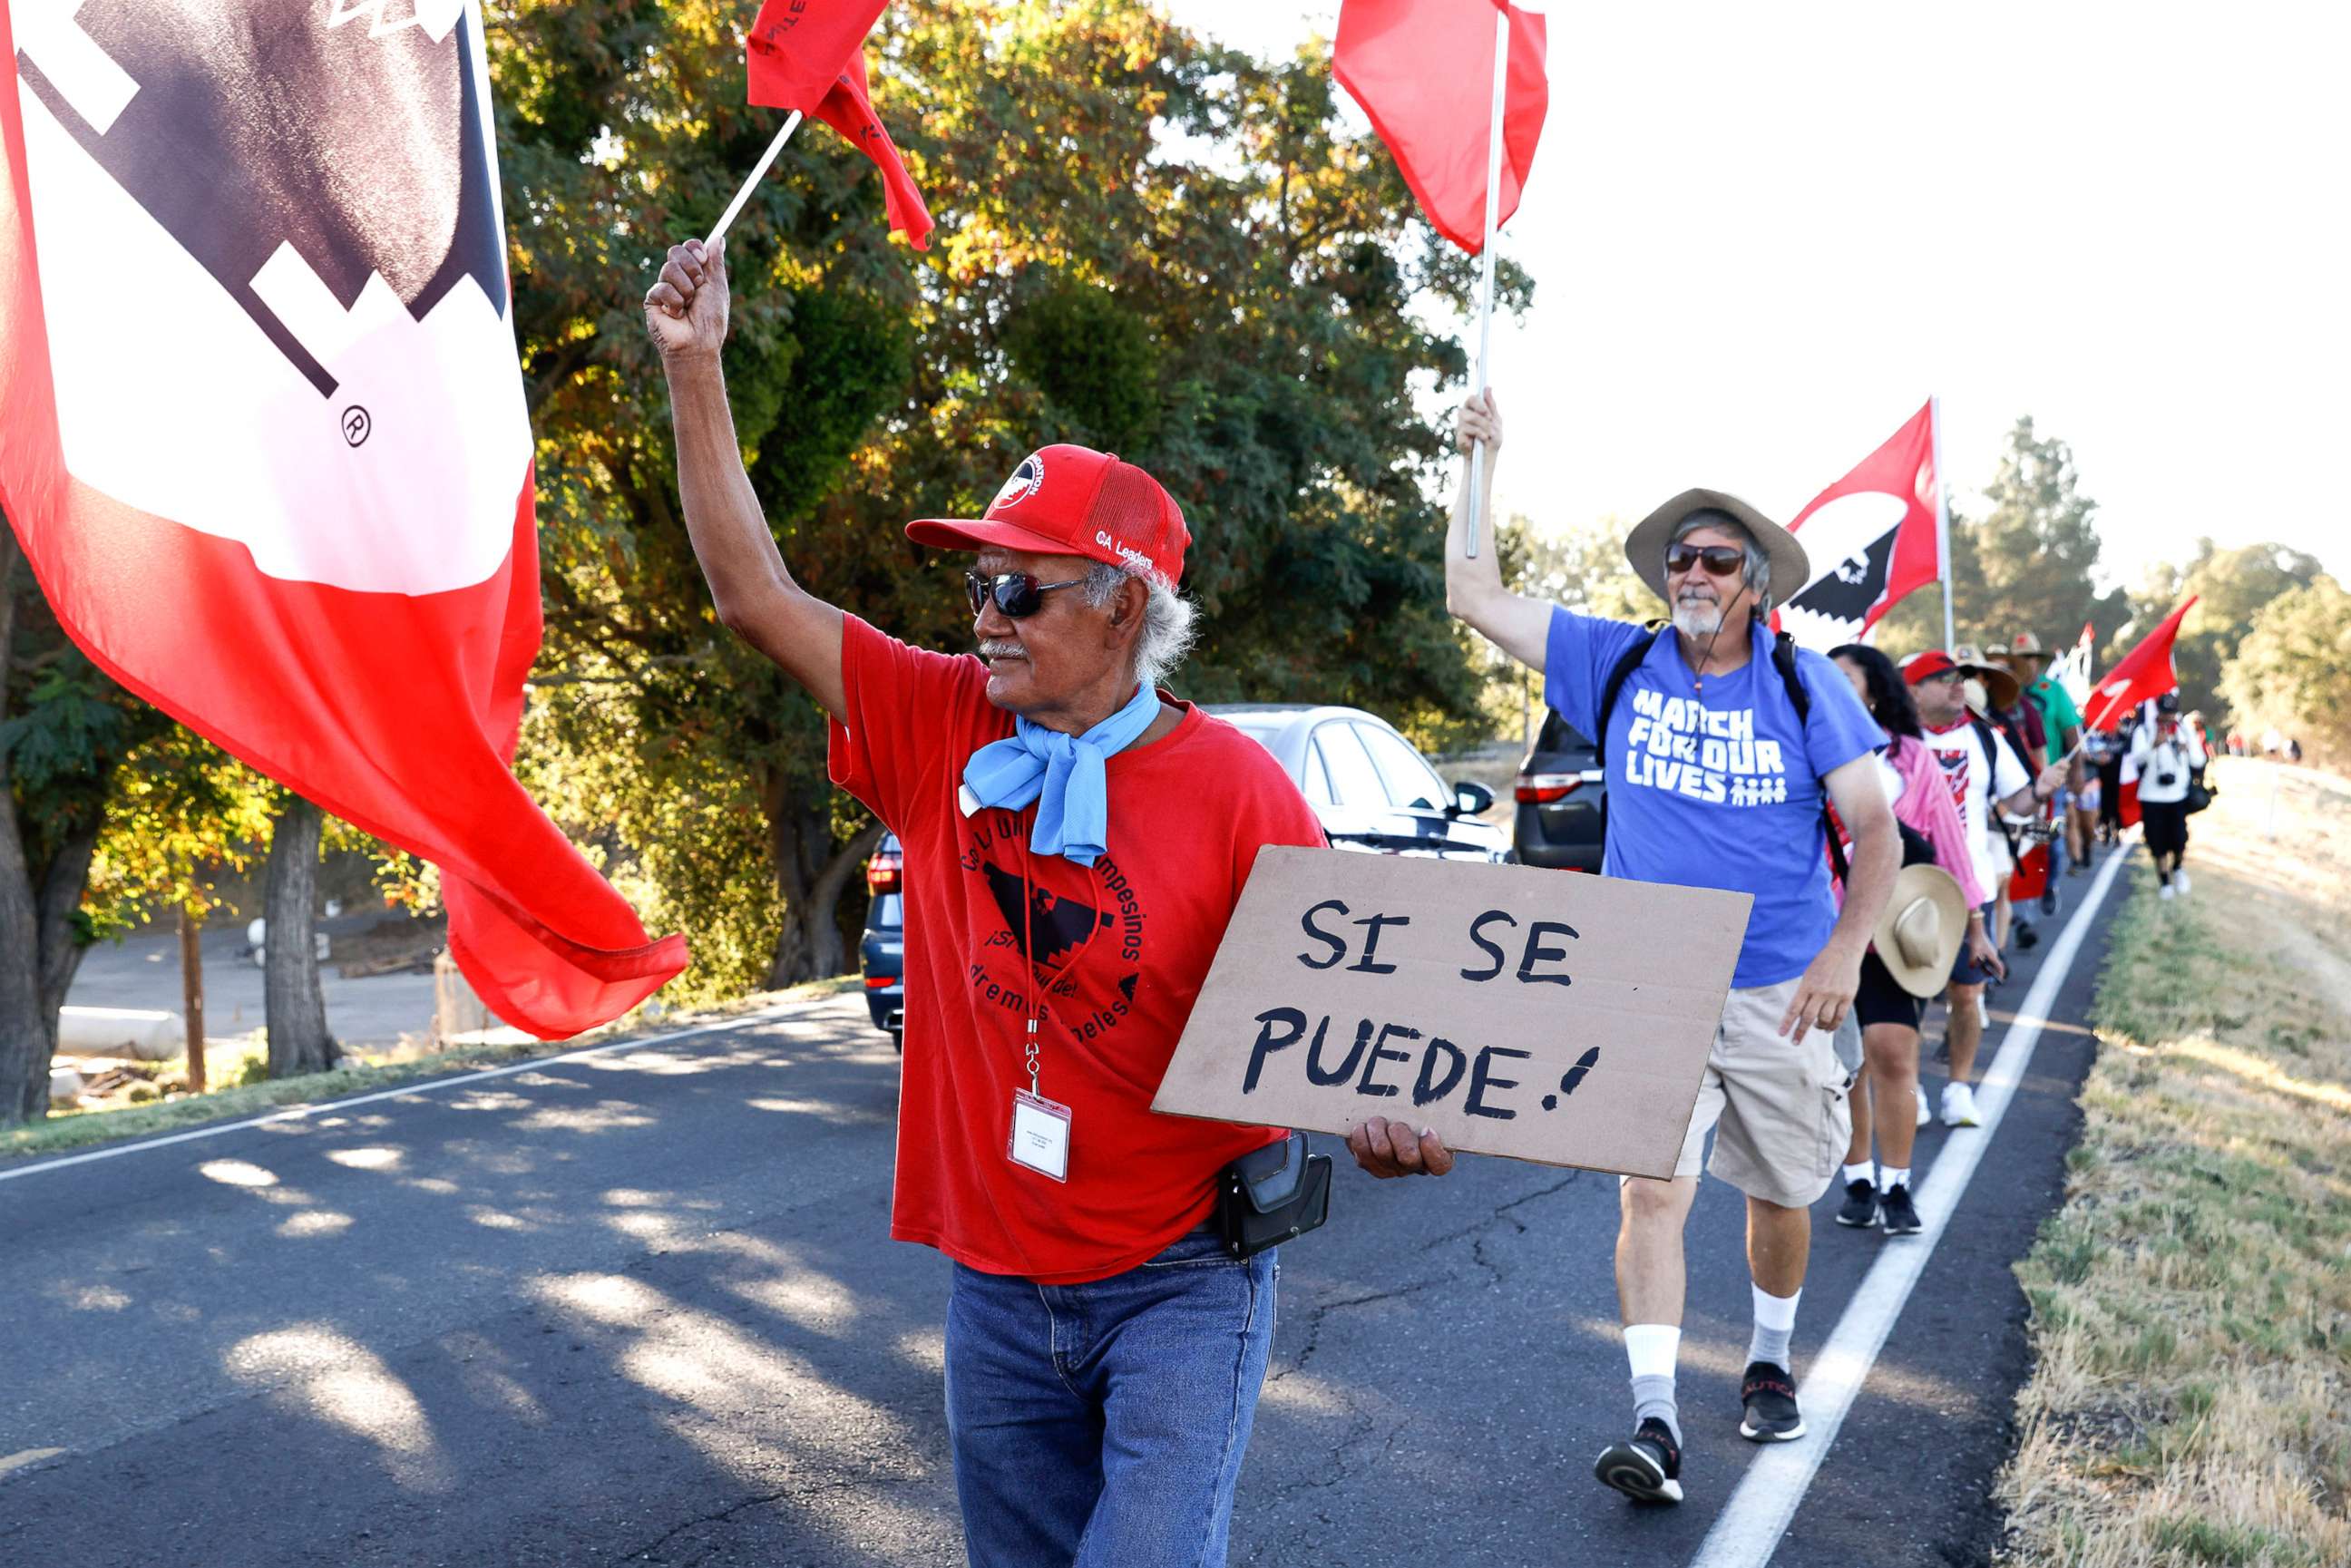 PHOTO: Fresno farm worker Asuncionn Ponce marches with fellow United Farm Workers members from Walnut Grove, Calif. to Elk Grove, Calif., Aug. 24, to urge Gov. Gavin Newsom to sign AB 2183, a bill allowing farm workers to vote by mail in union elections.